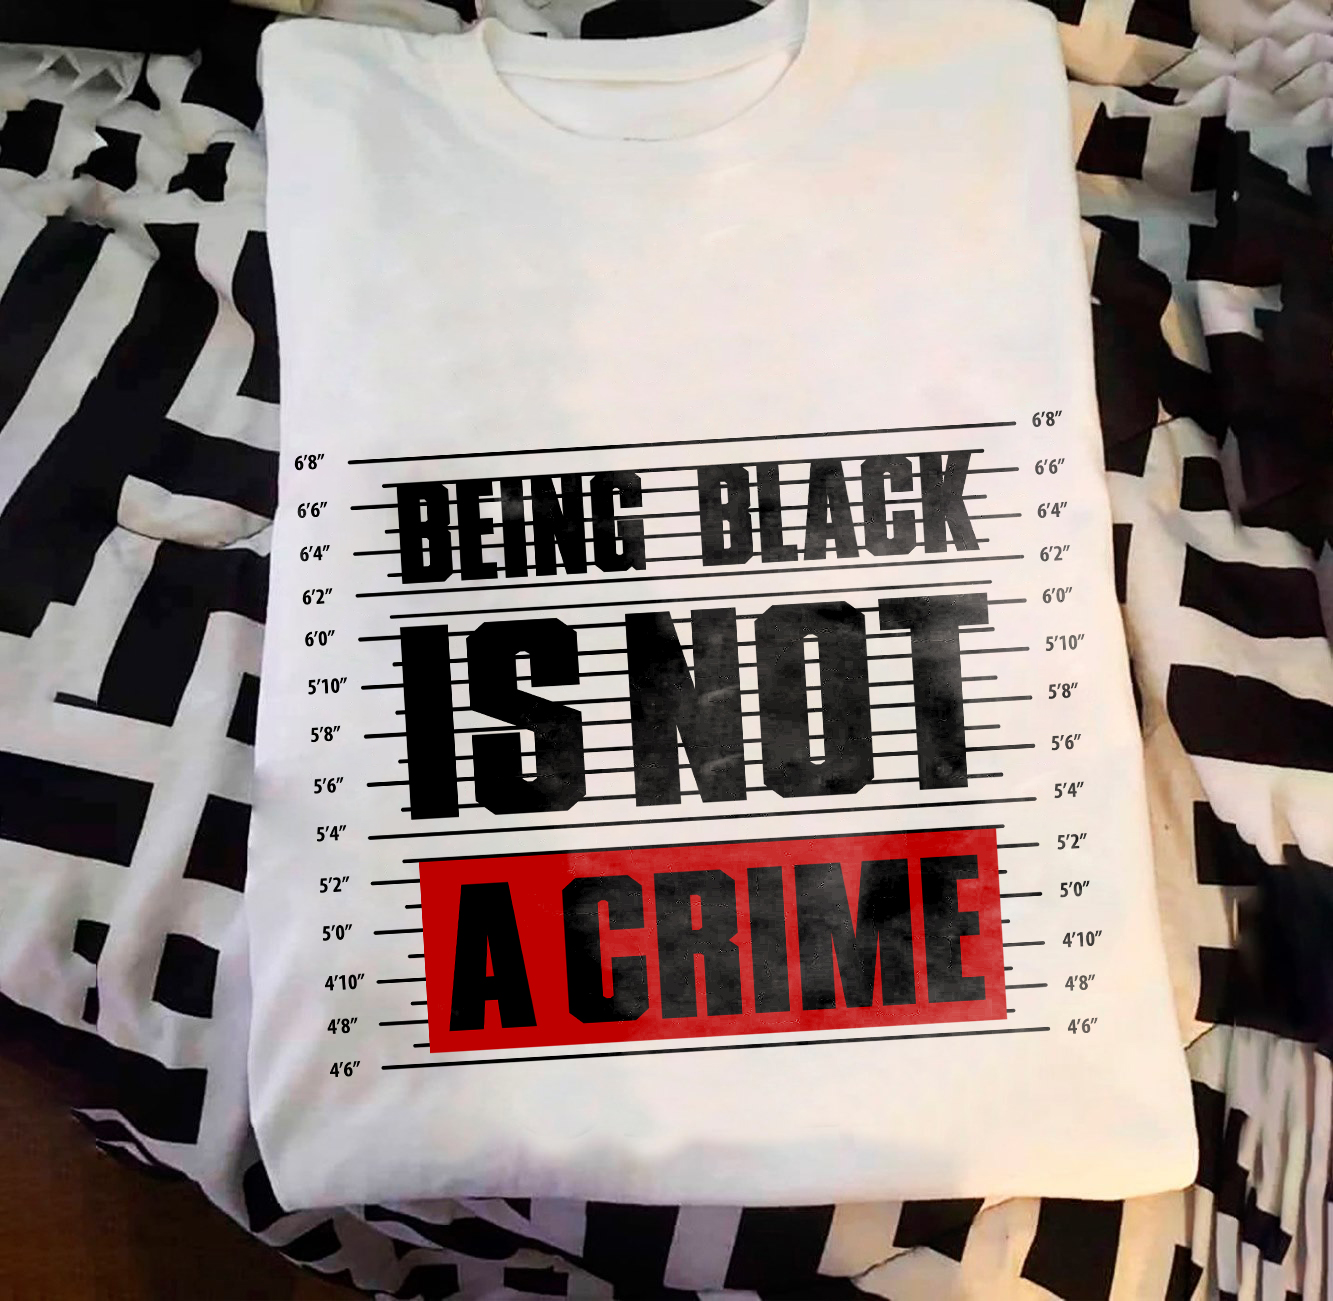 Being black is not a crime - Black community